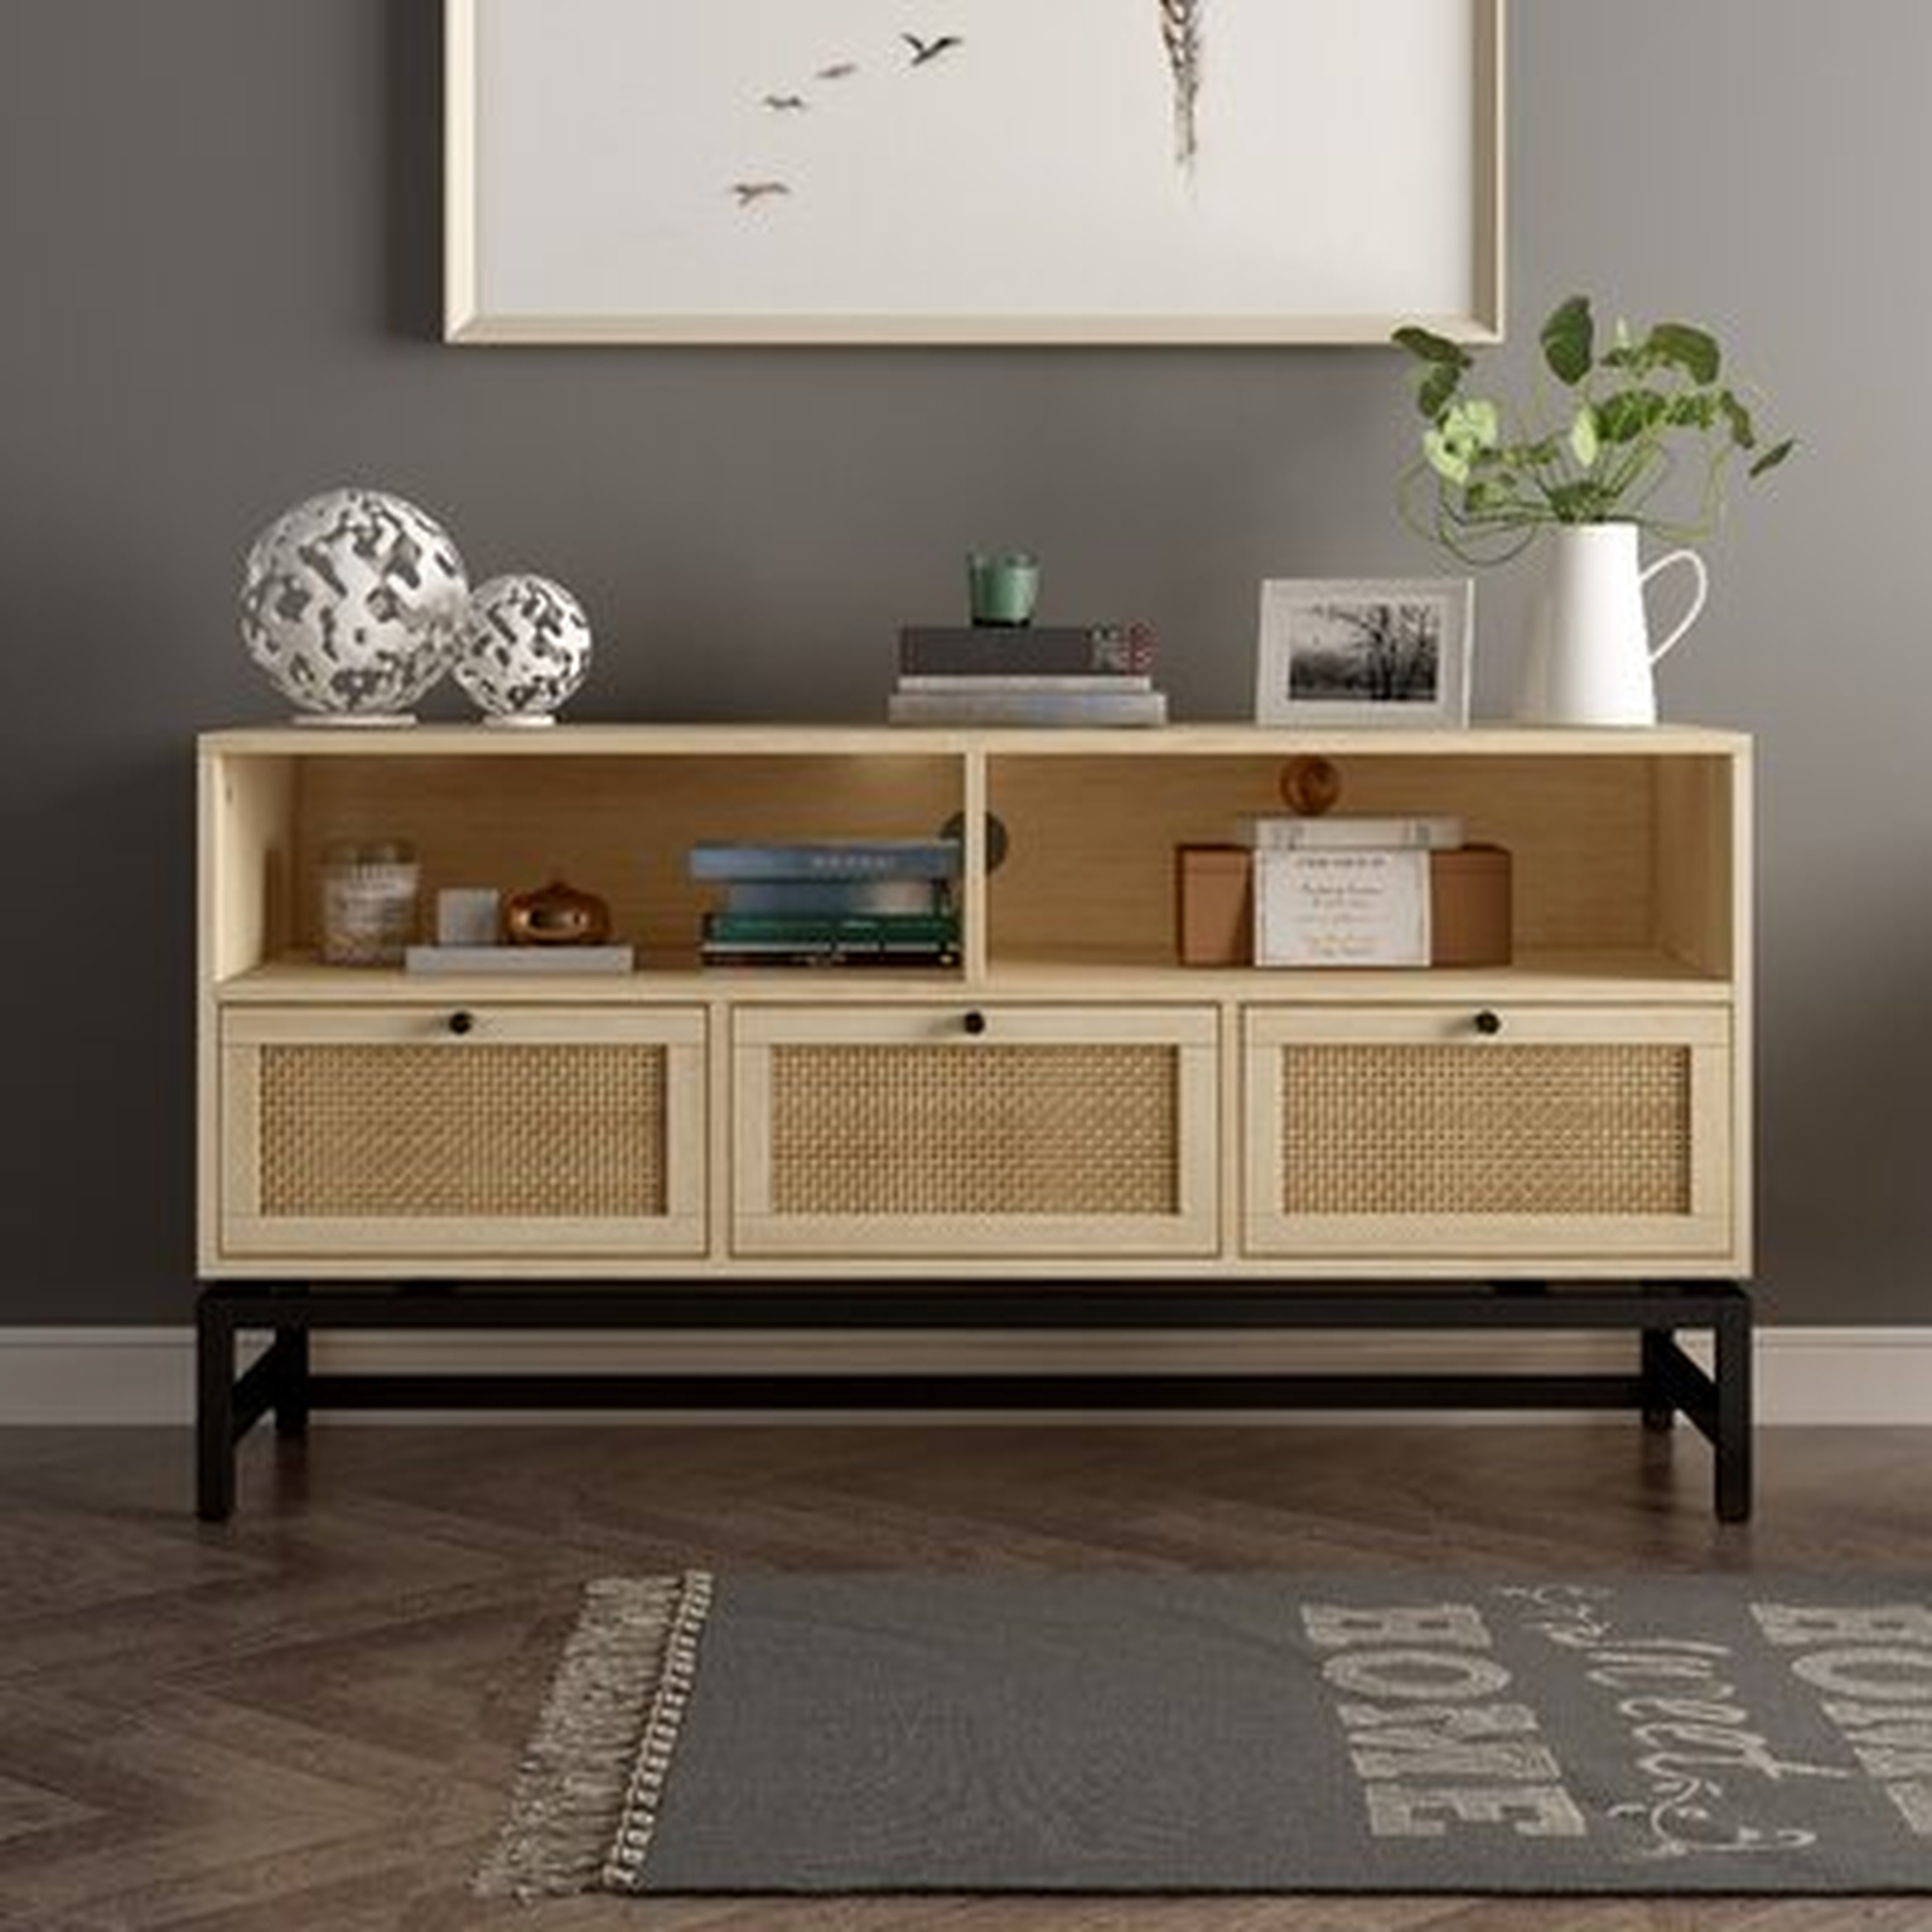 Quaint&Rustic TV Stand,3 Drawer With Rattan Elements,Unique And Natural TV Cabinet,Black Metal Frame,With Cable Management ,Can As Side Cabinet ,Locker,For Living Room Or Bedroom - Wayfair